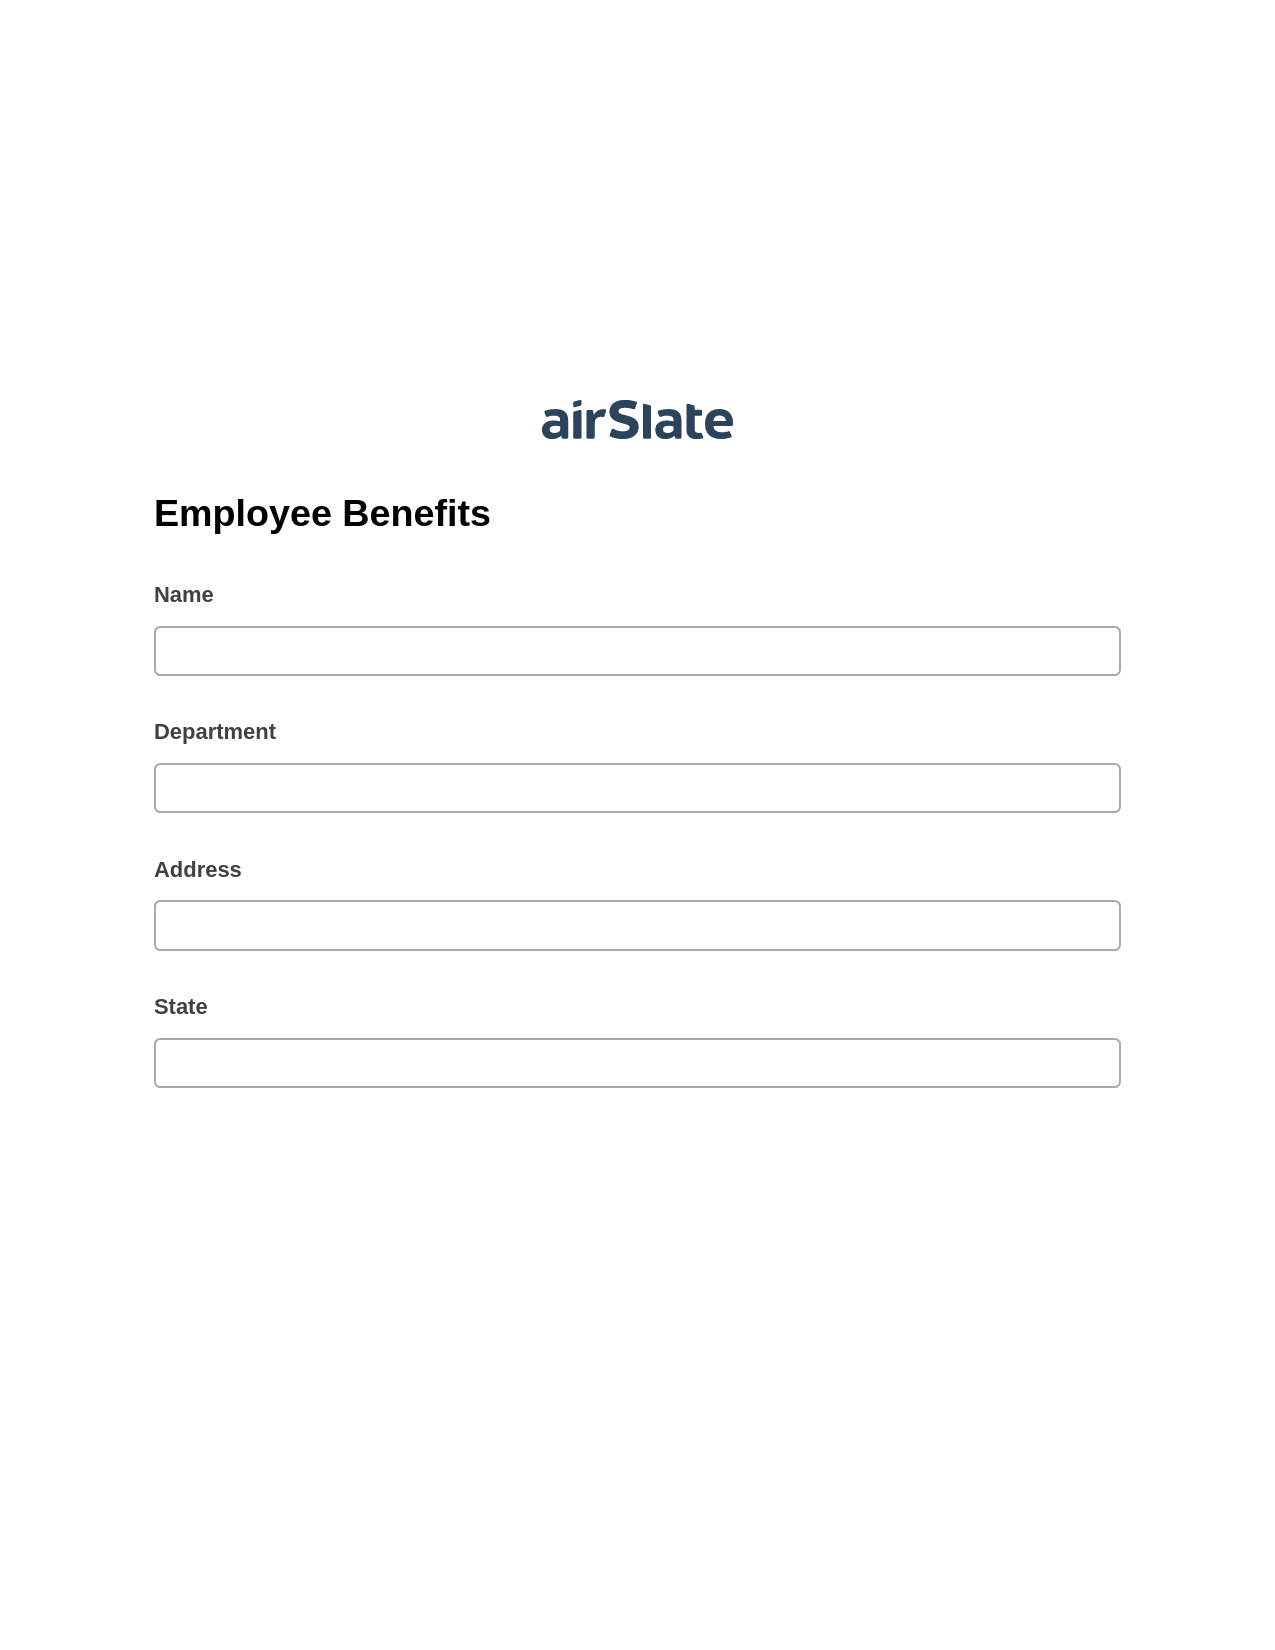 Employee Benefits Pre-fill Slate from MS Dynamics 365 Records Bot, Create QuickBooks invoice Bot, Export to Google Sheet Bot